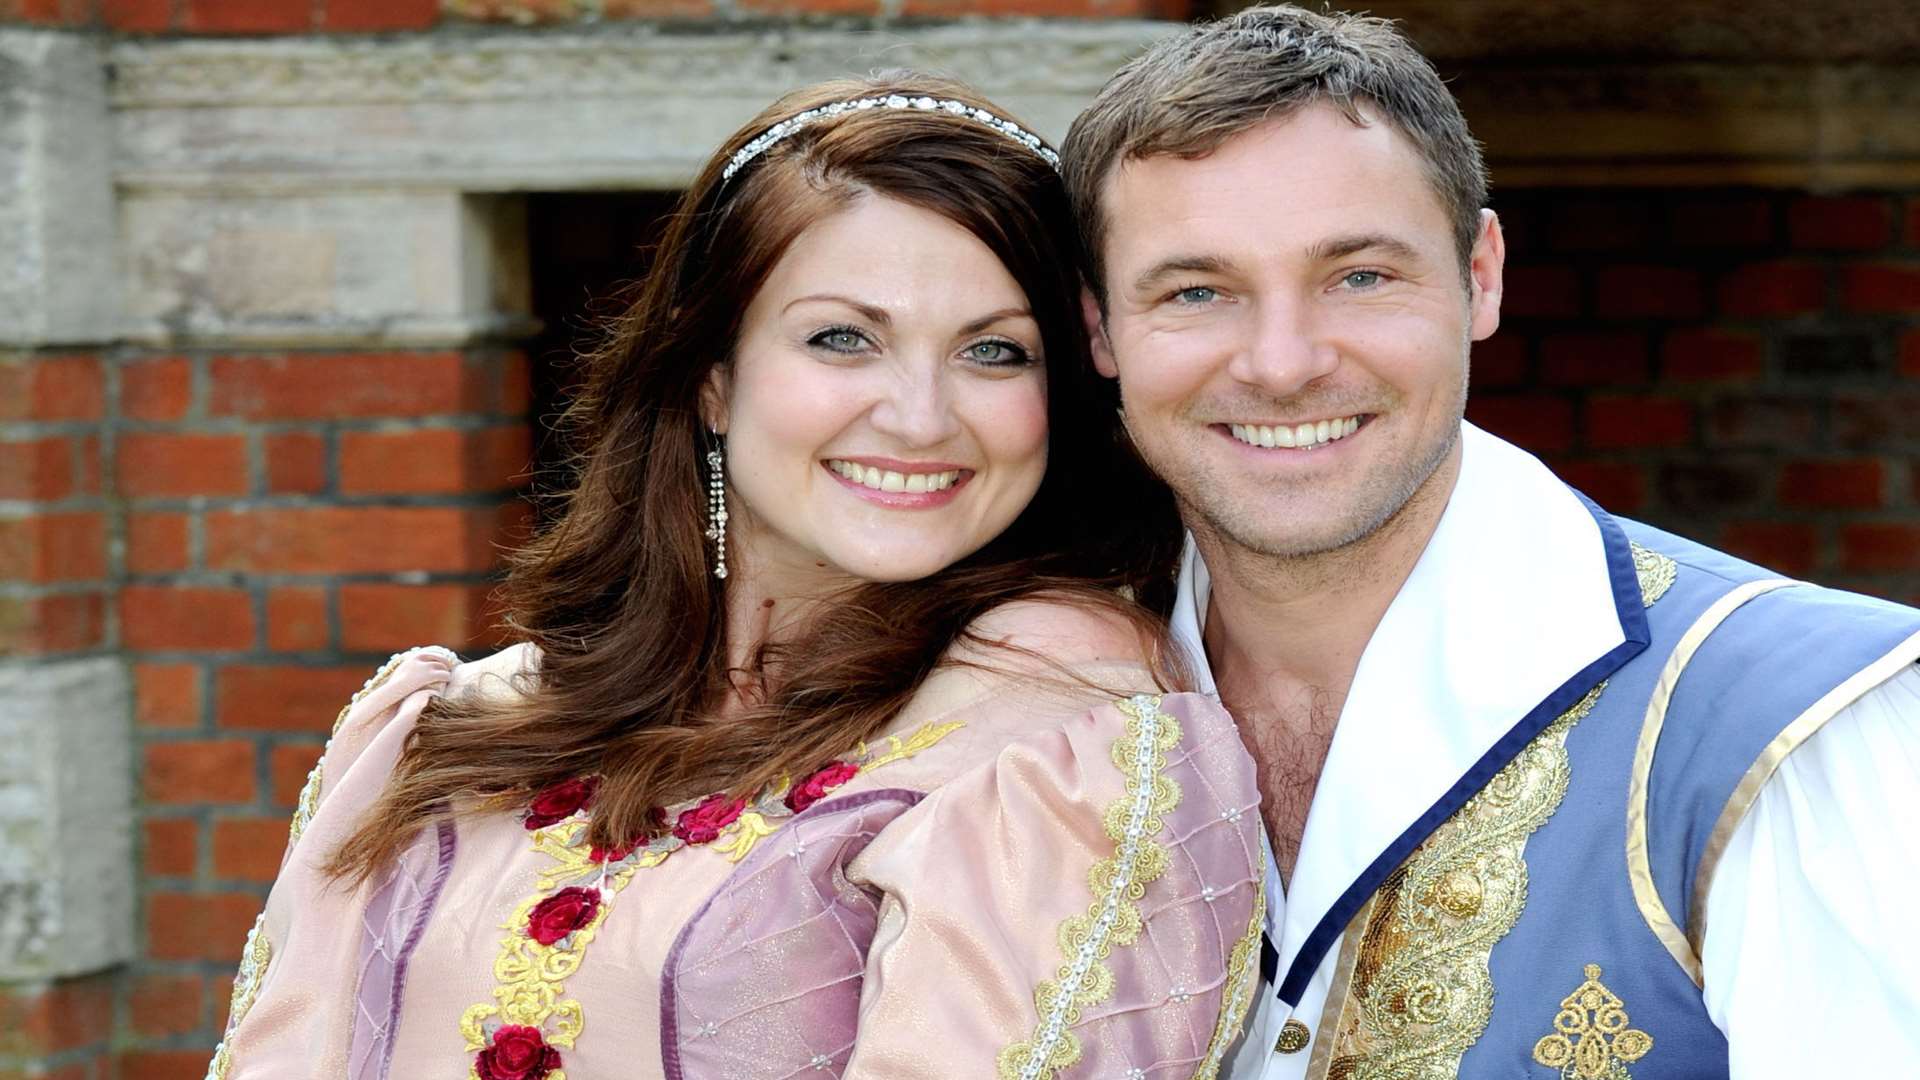 Also appearing in Sleeping Beauty are Sophia Thierens and Marc Baylis